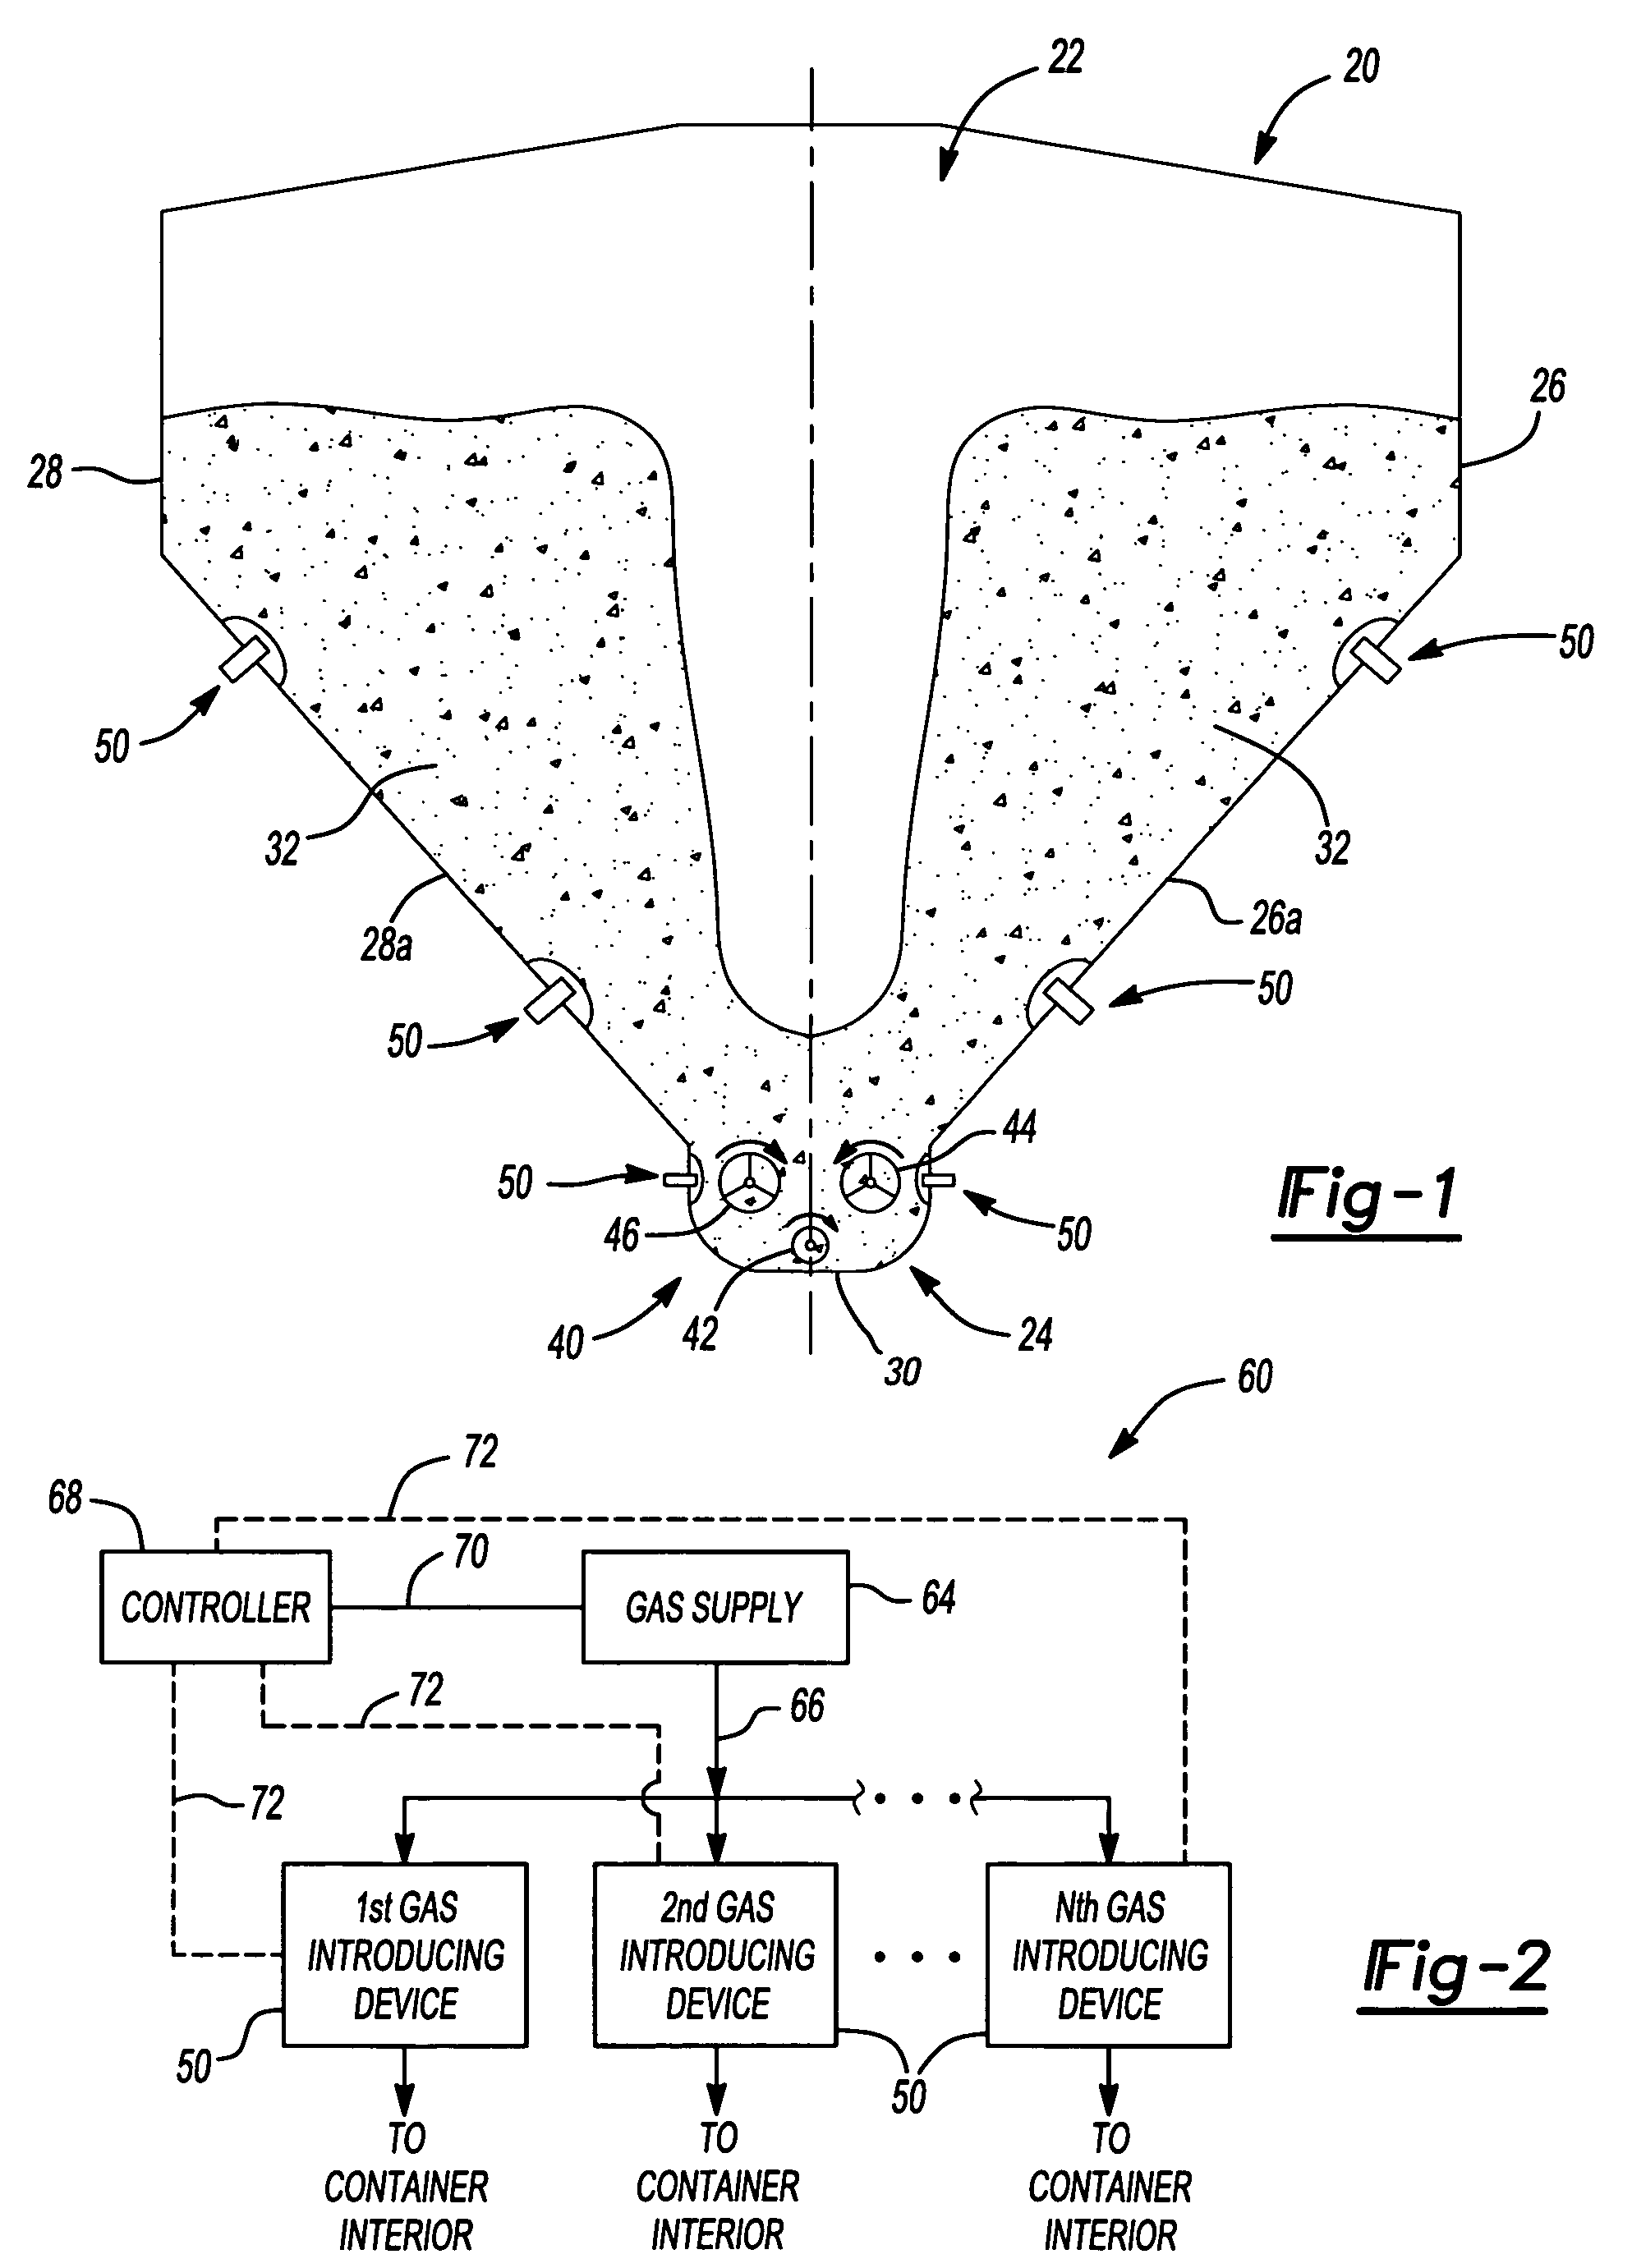 Method of supplying a powdered chemical composition to a wellsite